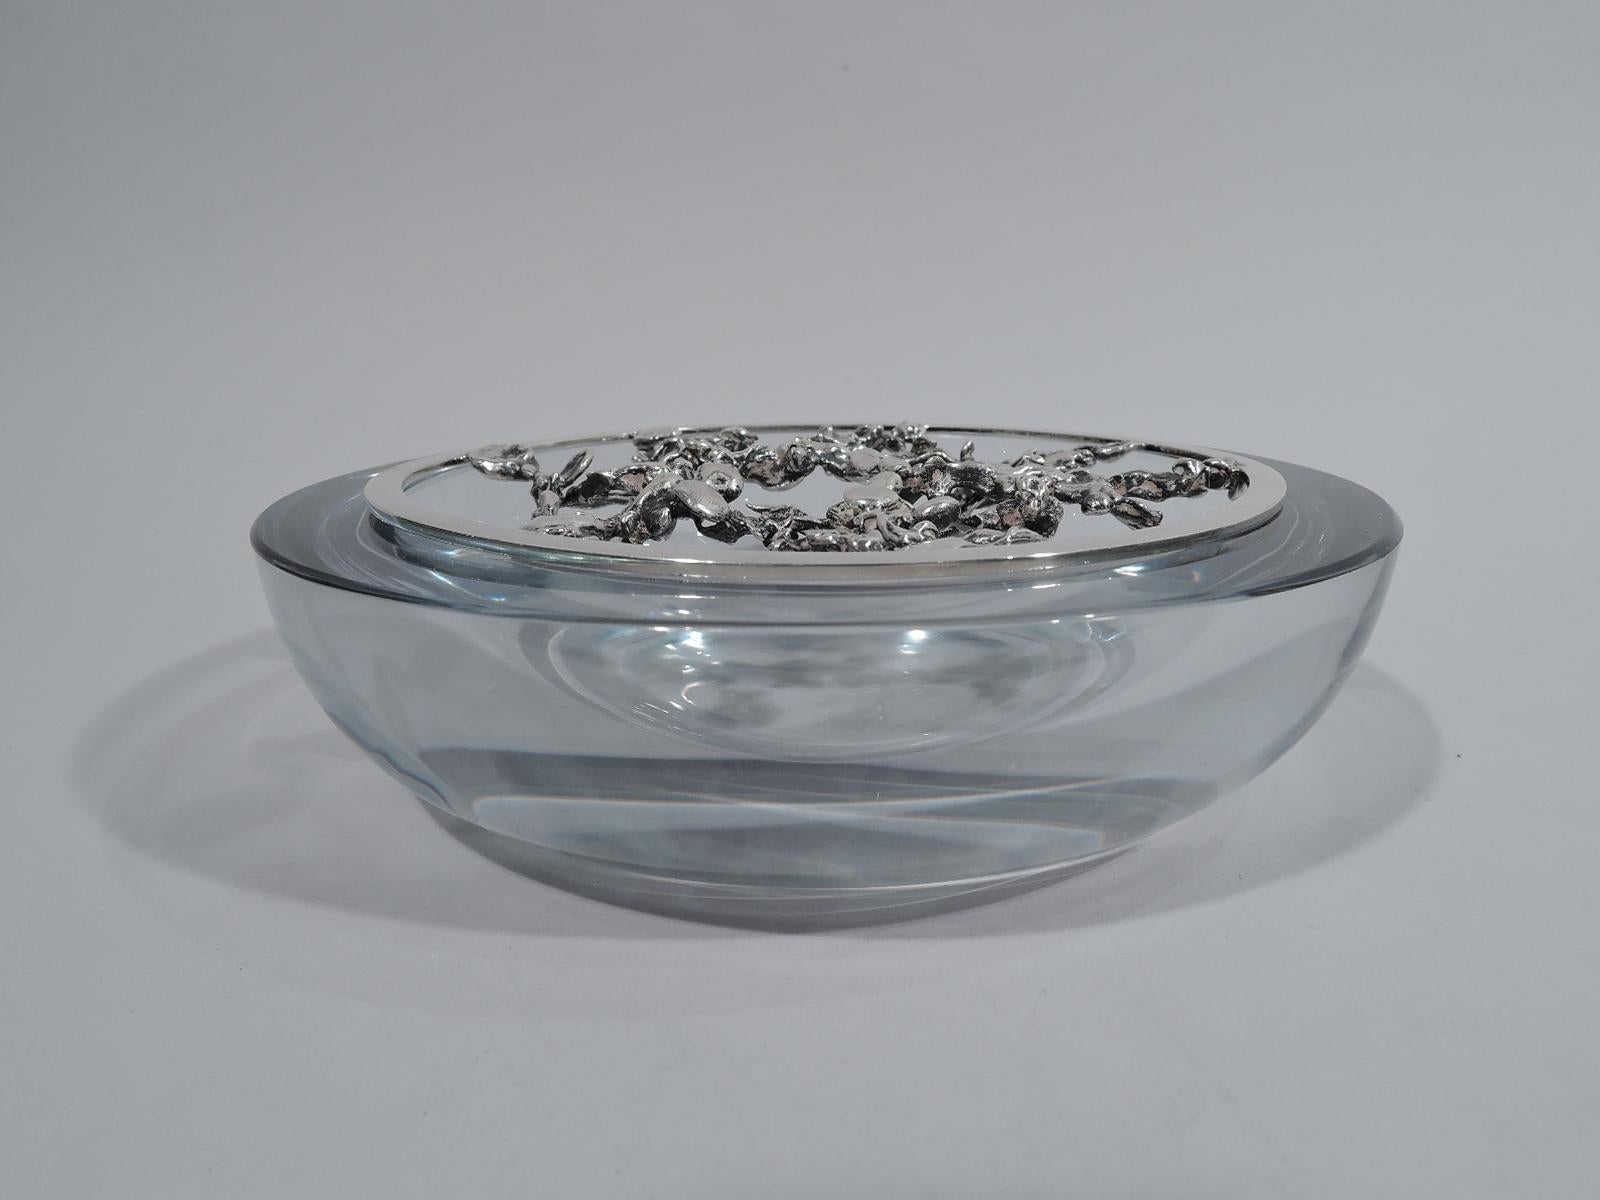 Danish modern glass and sterling silver bowl. Clear glass with curved sides and wide and flat rim. Sterling silver “frog” comprising tooled and irregular stretchers set in plain and flat round ring. Silver marked “925S” with maker’s stamp for Aage